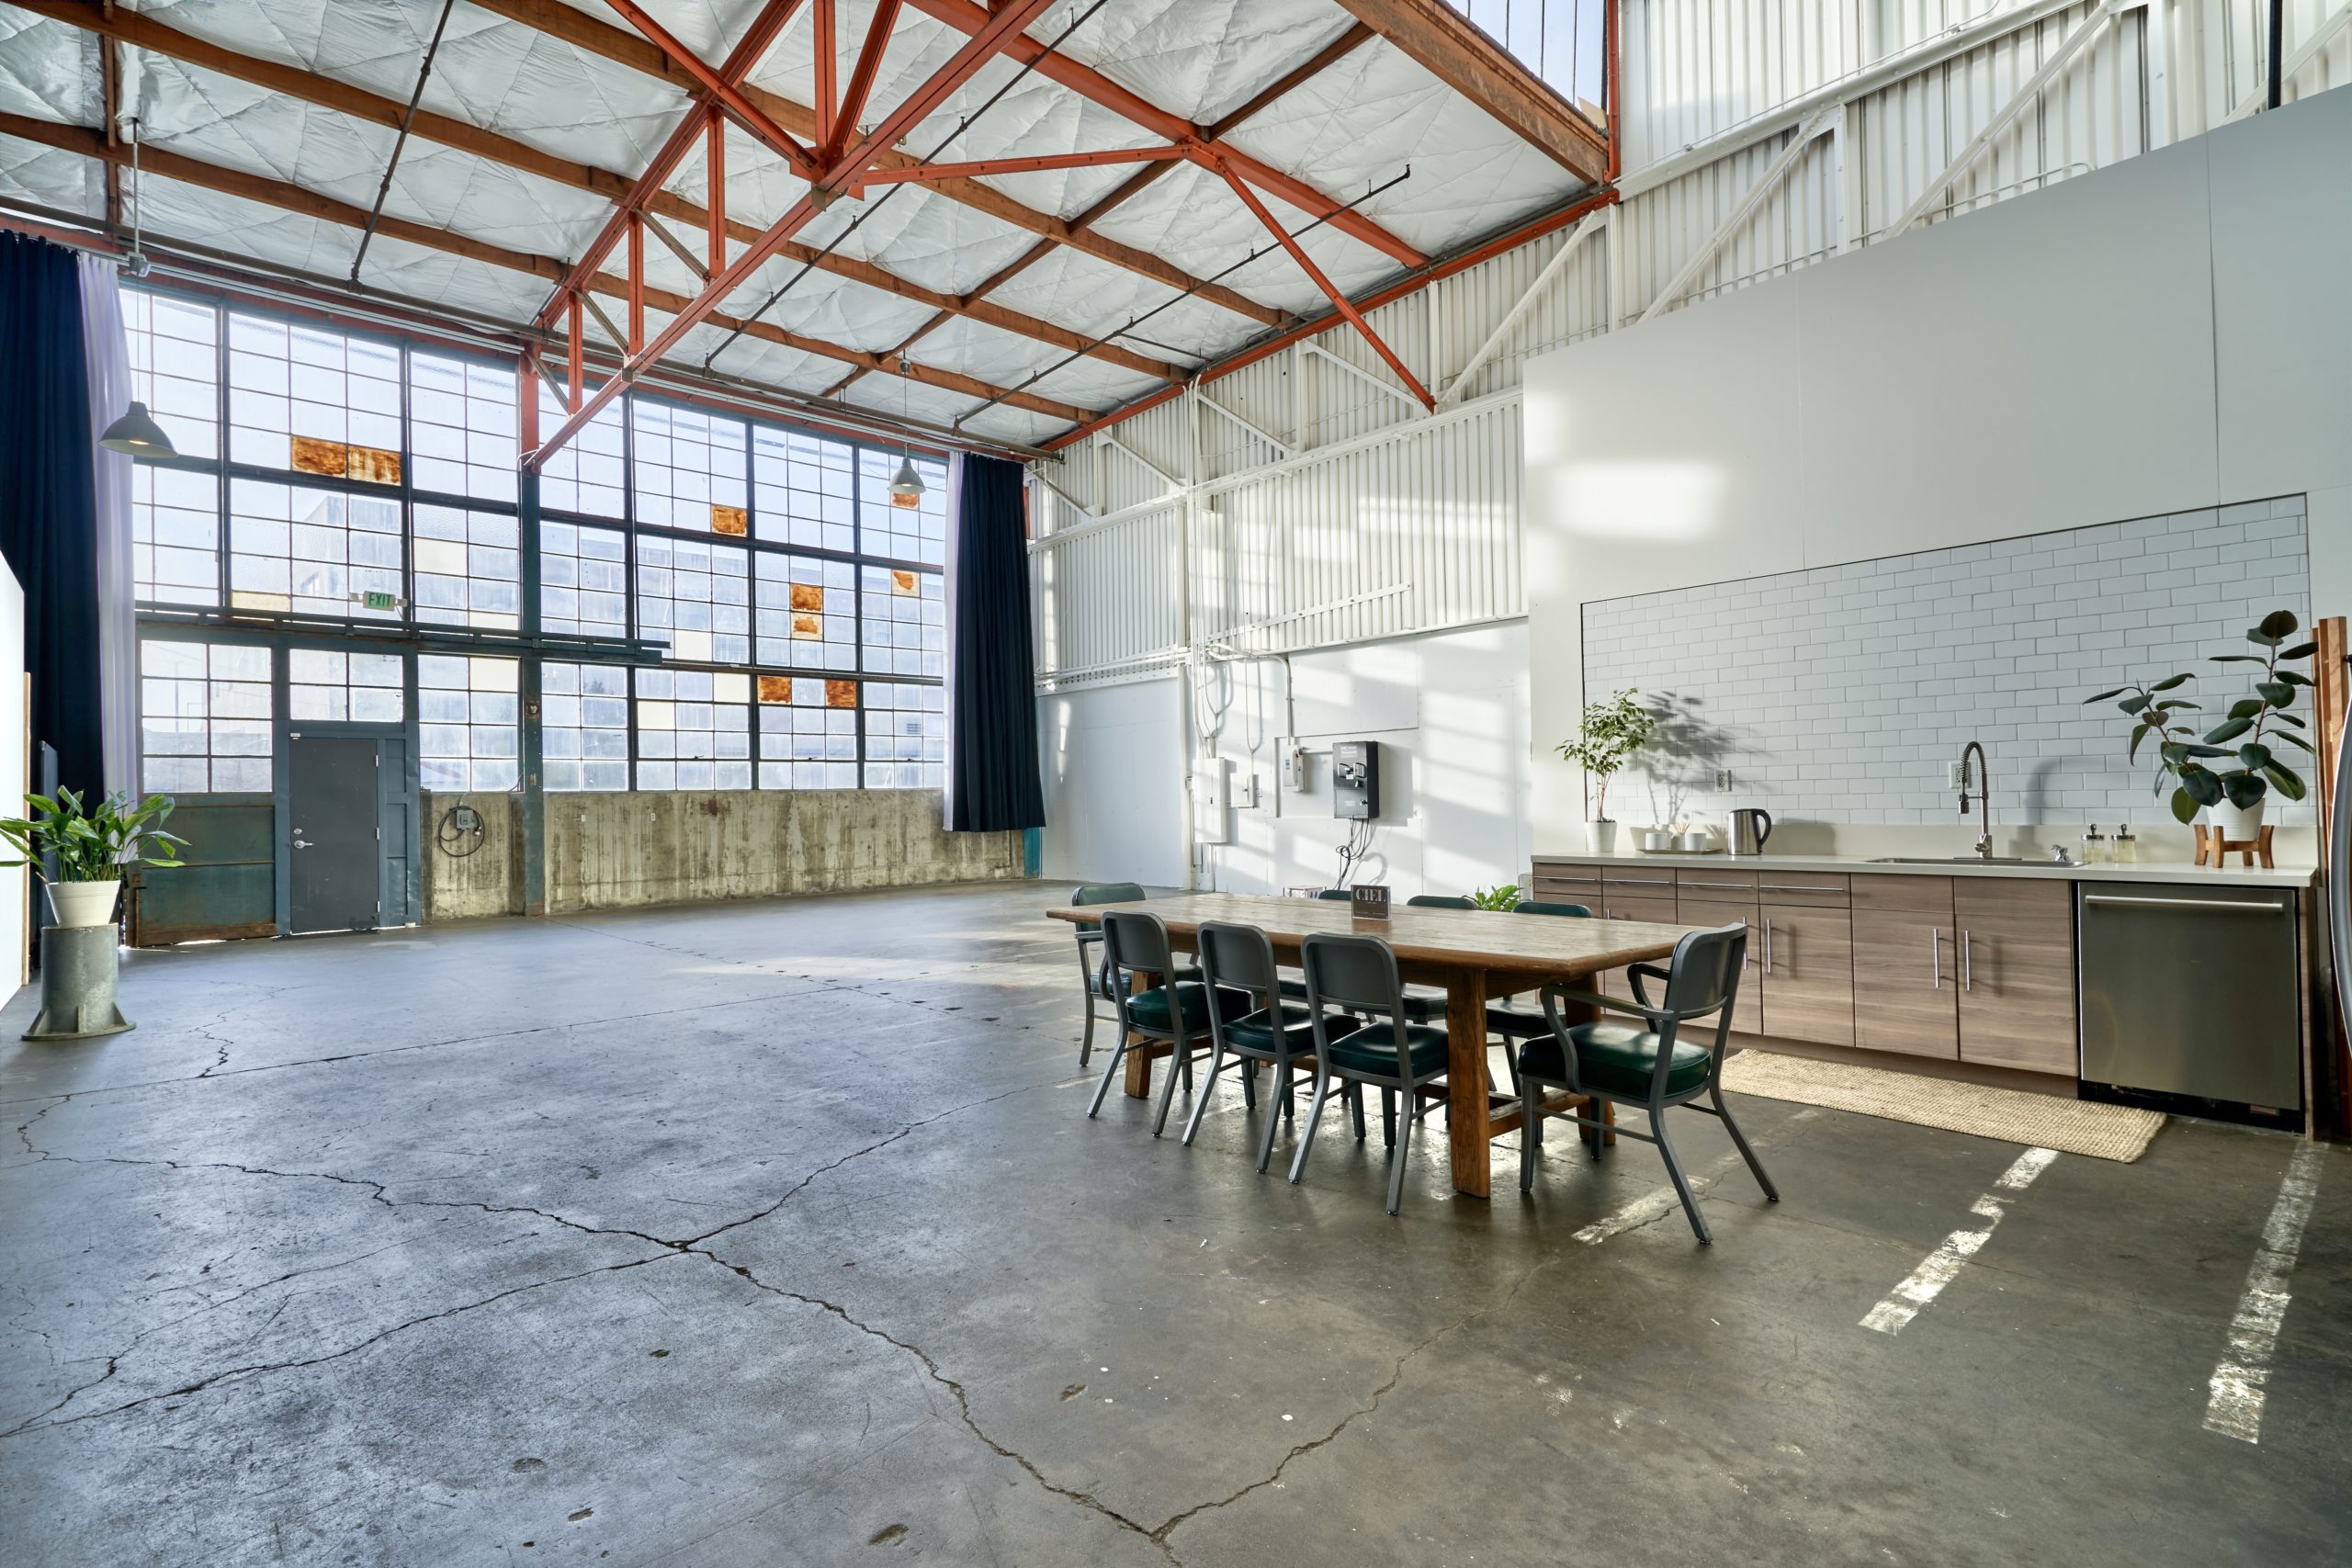 This 2,000 square feet space has lots of light let in from a giant window. It also has a private kitchenette, a ceiling with orange beams, and a large table with seating inside this great creative studio space for rent.